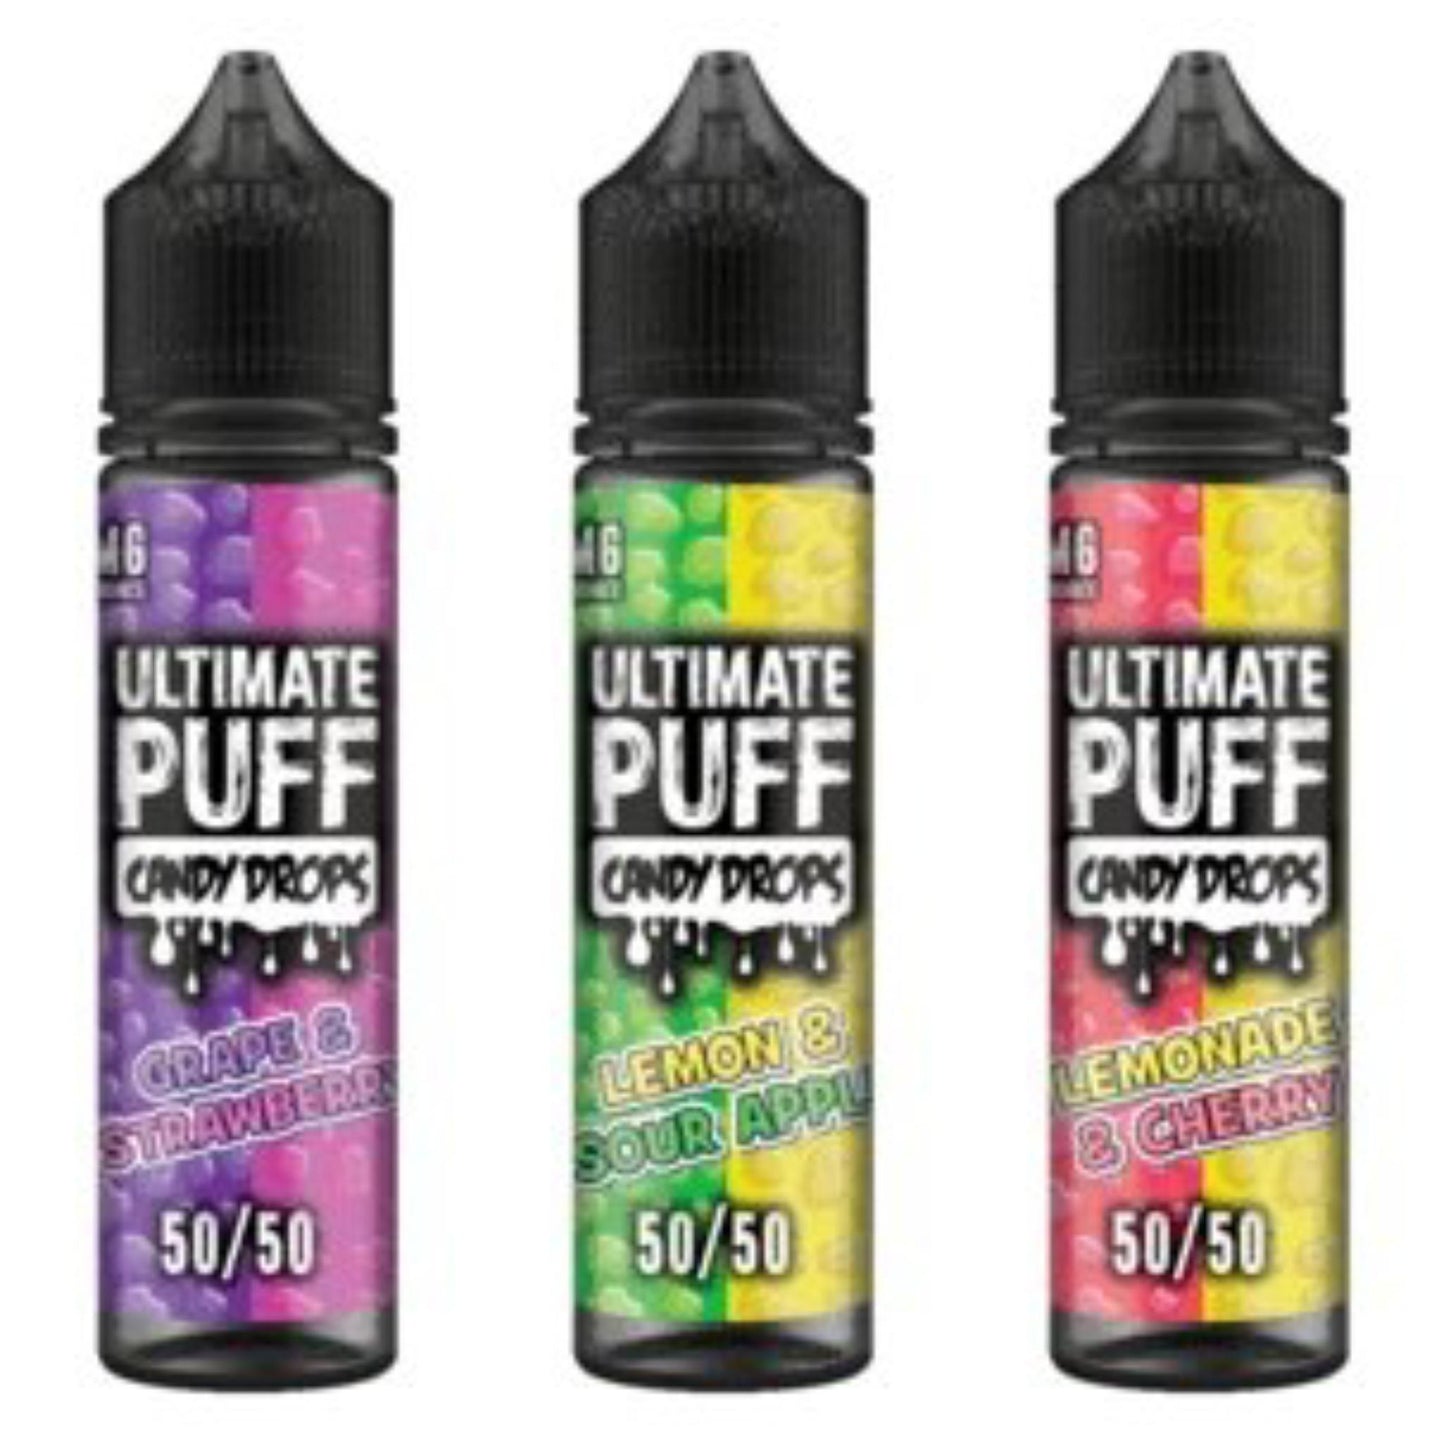 Ultimate 50ml Puff Candy Drops